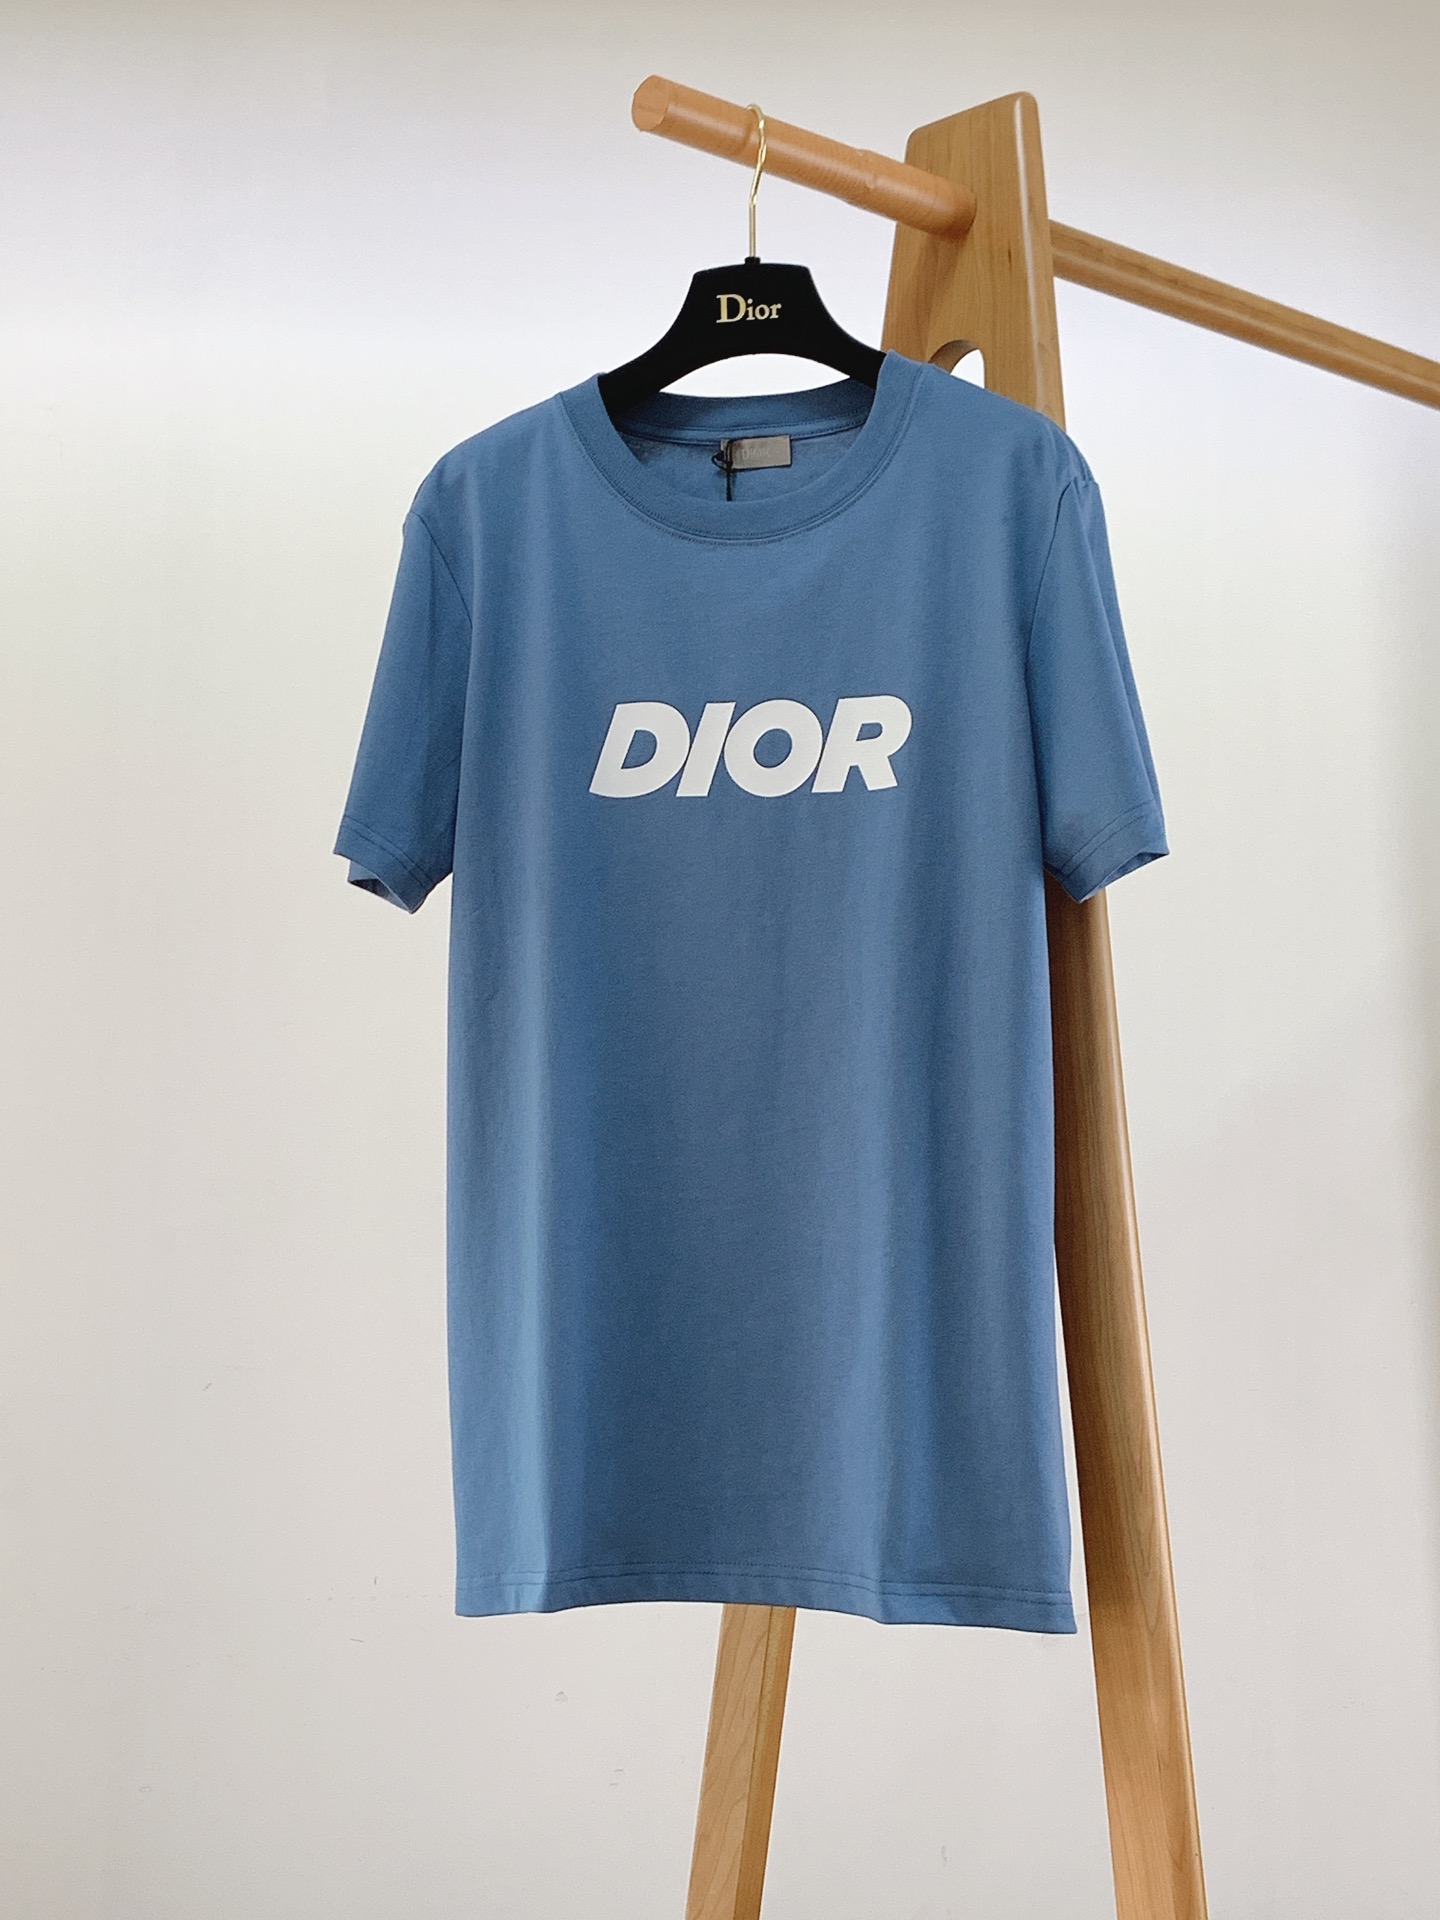 Dior Clothing T-Shirt Most Desired
 Blue Printing Cotton Knitting Spring/Summer Collection Fashion Short Sleeve